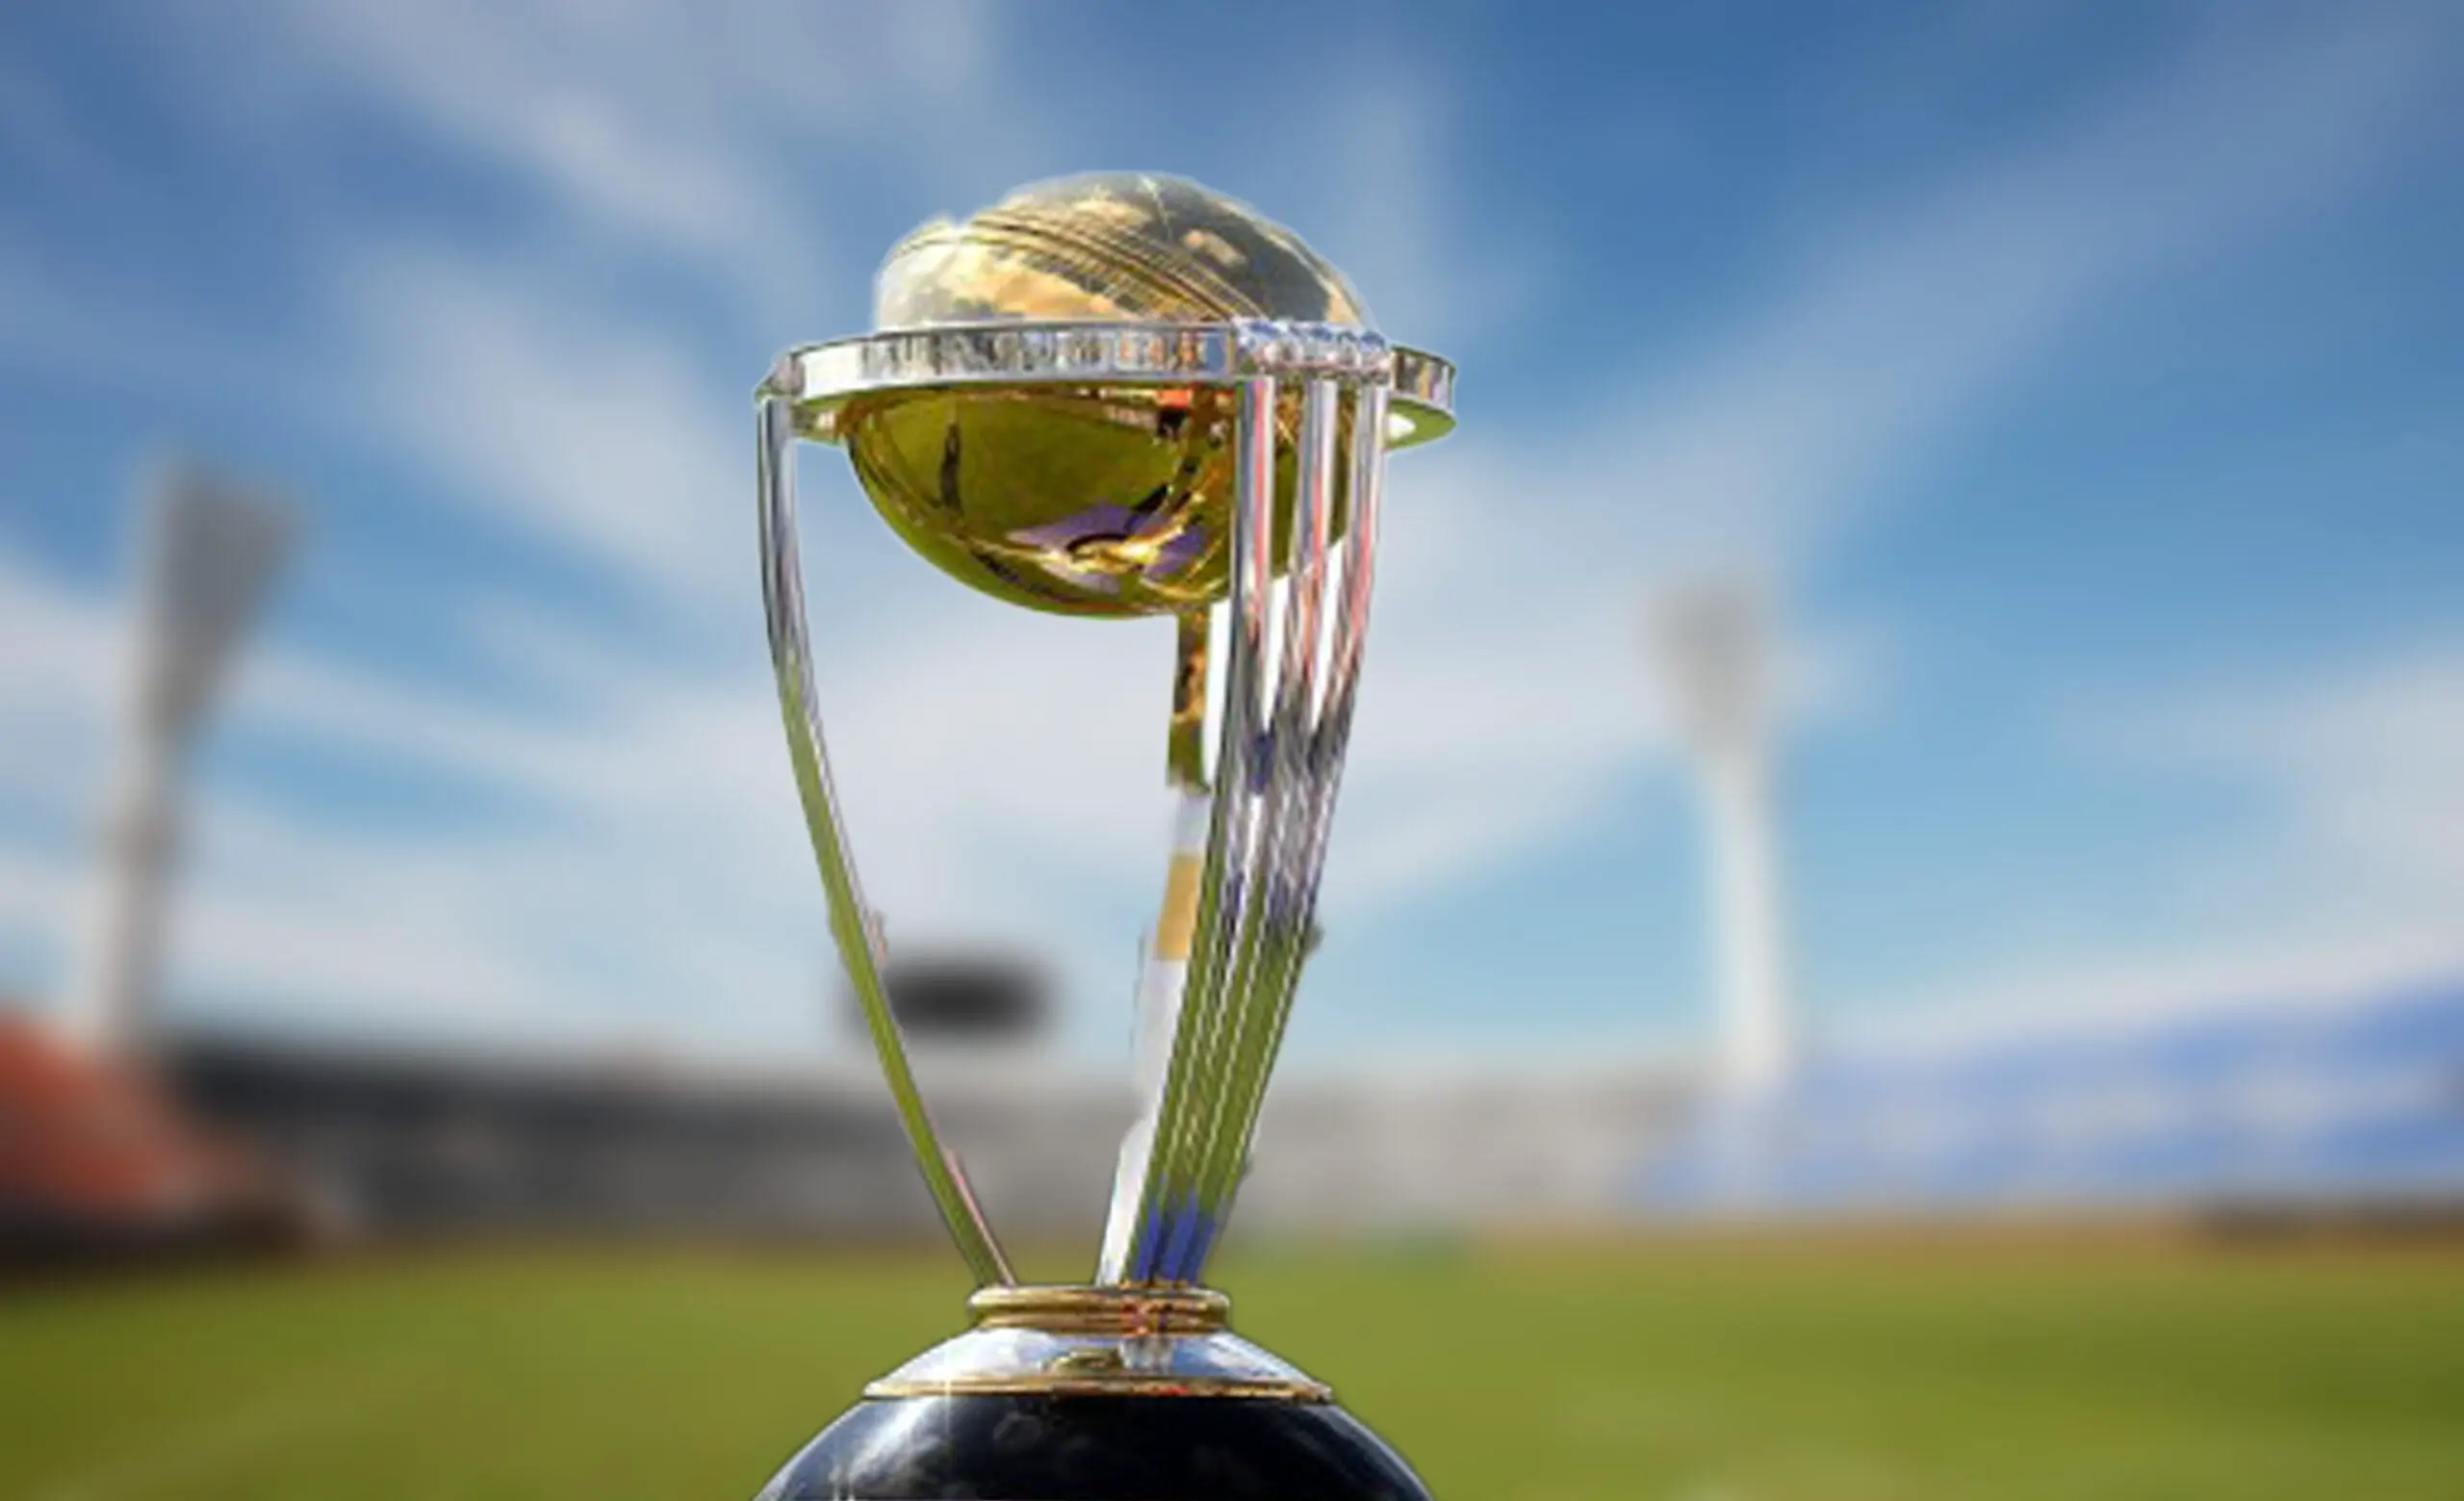 Grab Your Pass: ICC 2023 World Cup Tickets Launch on August 25th! Secure Your Seat Now